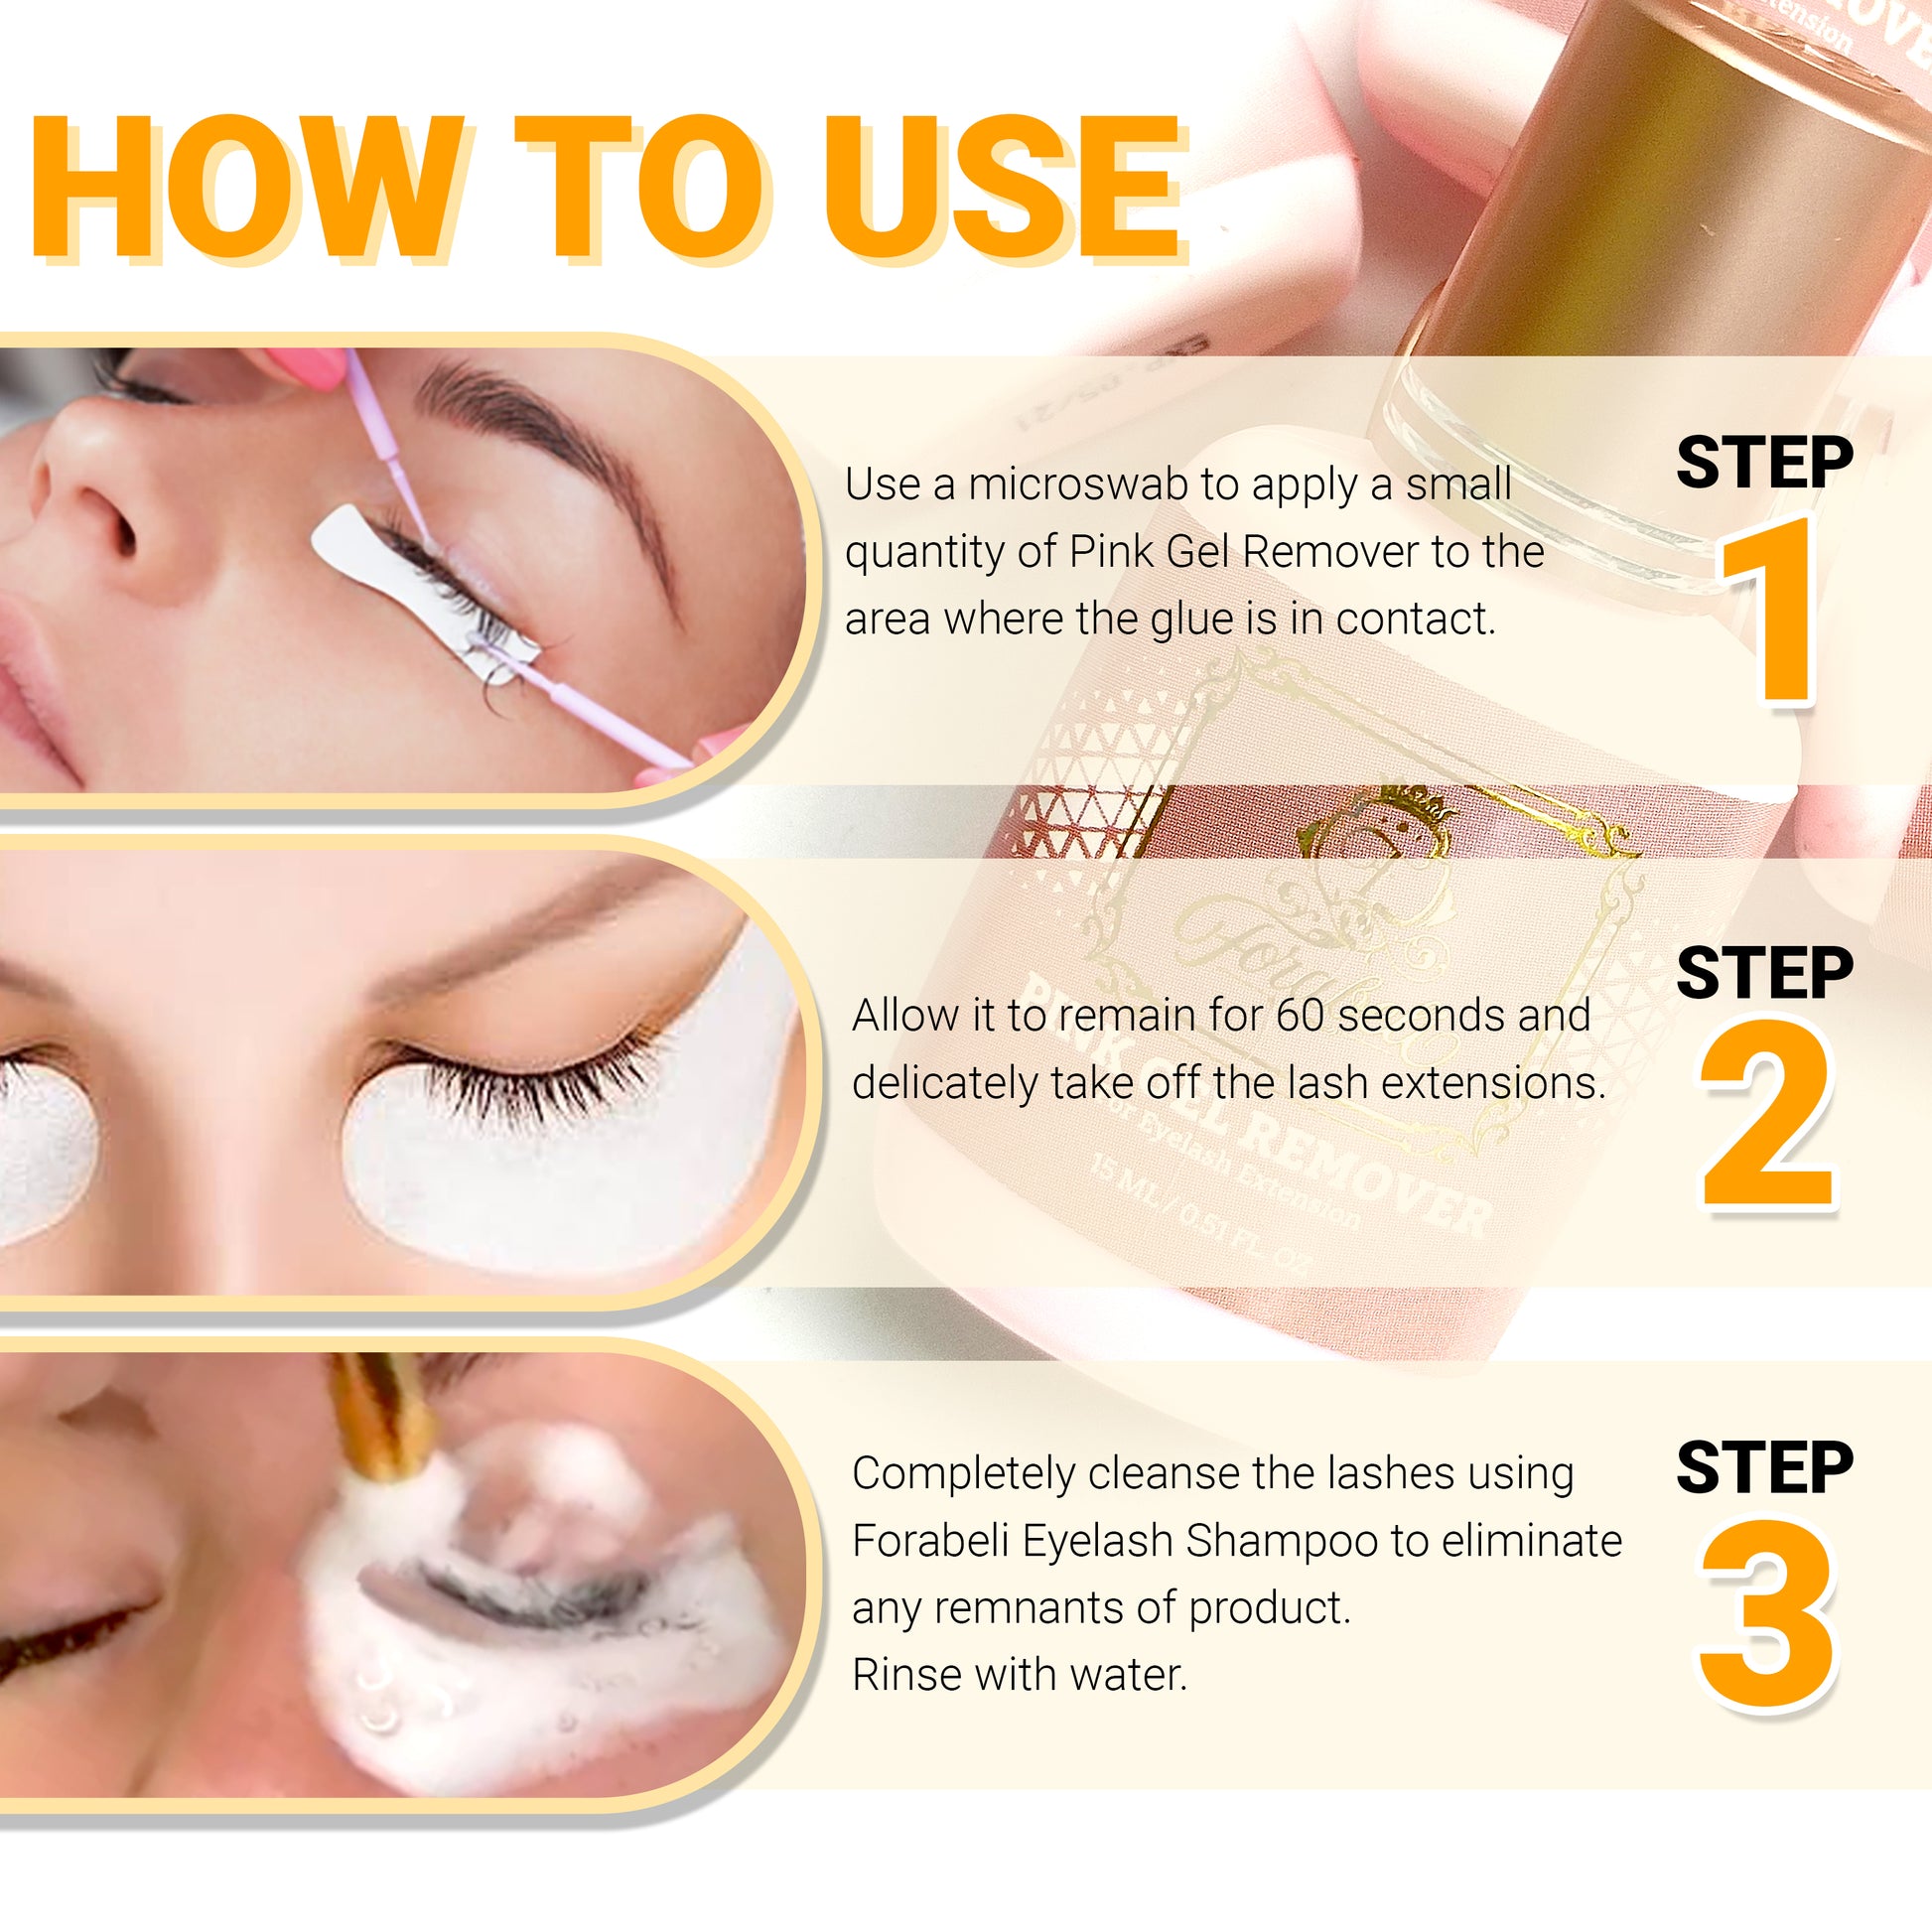 How to use Product image of Forabeli Eyelash Extension Glue Remover, a pink gel lash remover that is GBL free, gentle on eyelashes, and effectively dissolves lash extension adhesive. It is a safe and easy-to-apply lash glue cleaner.